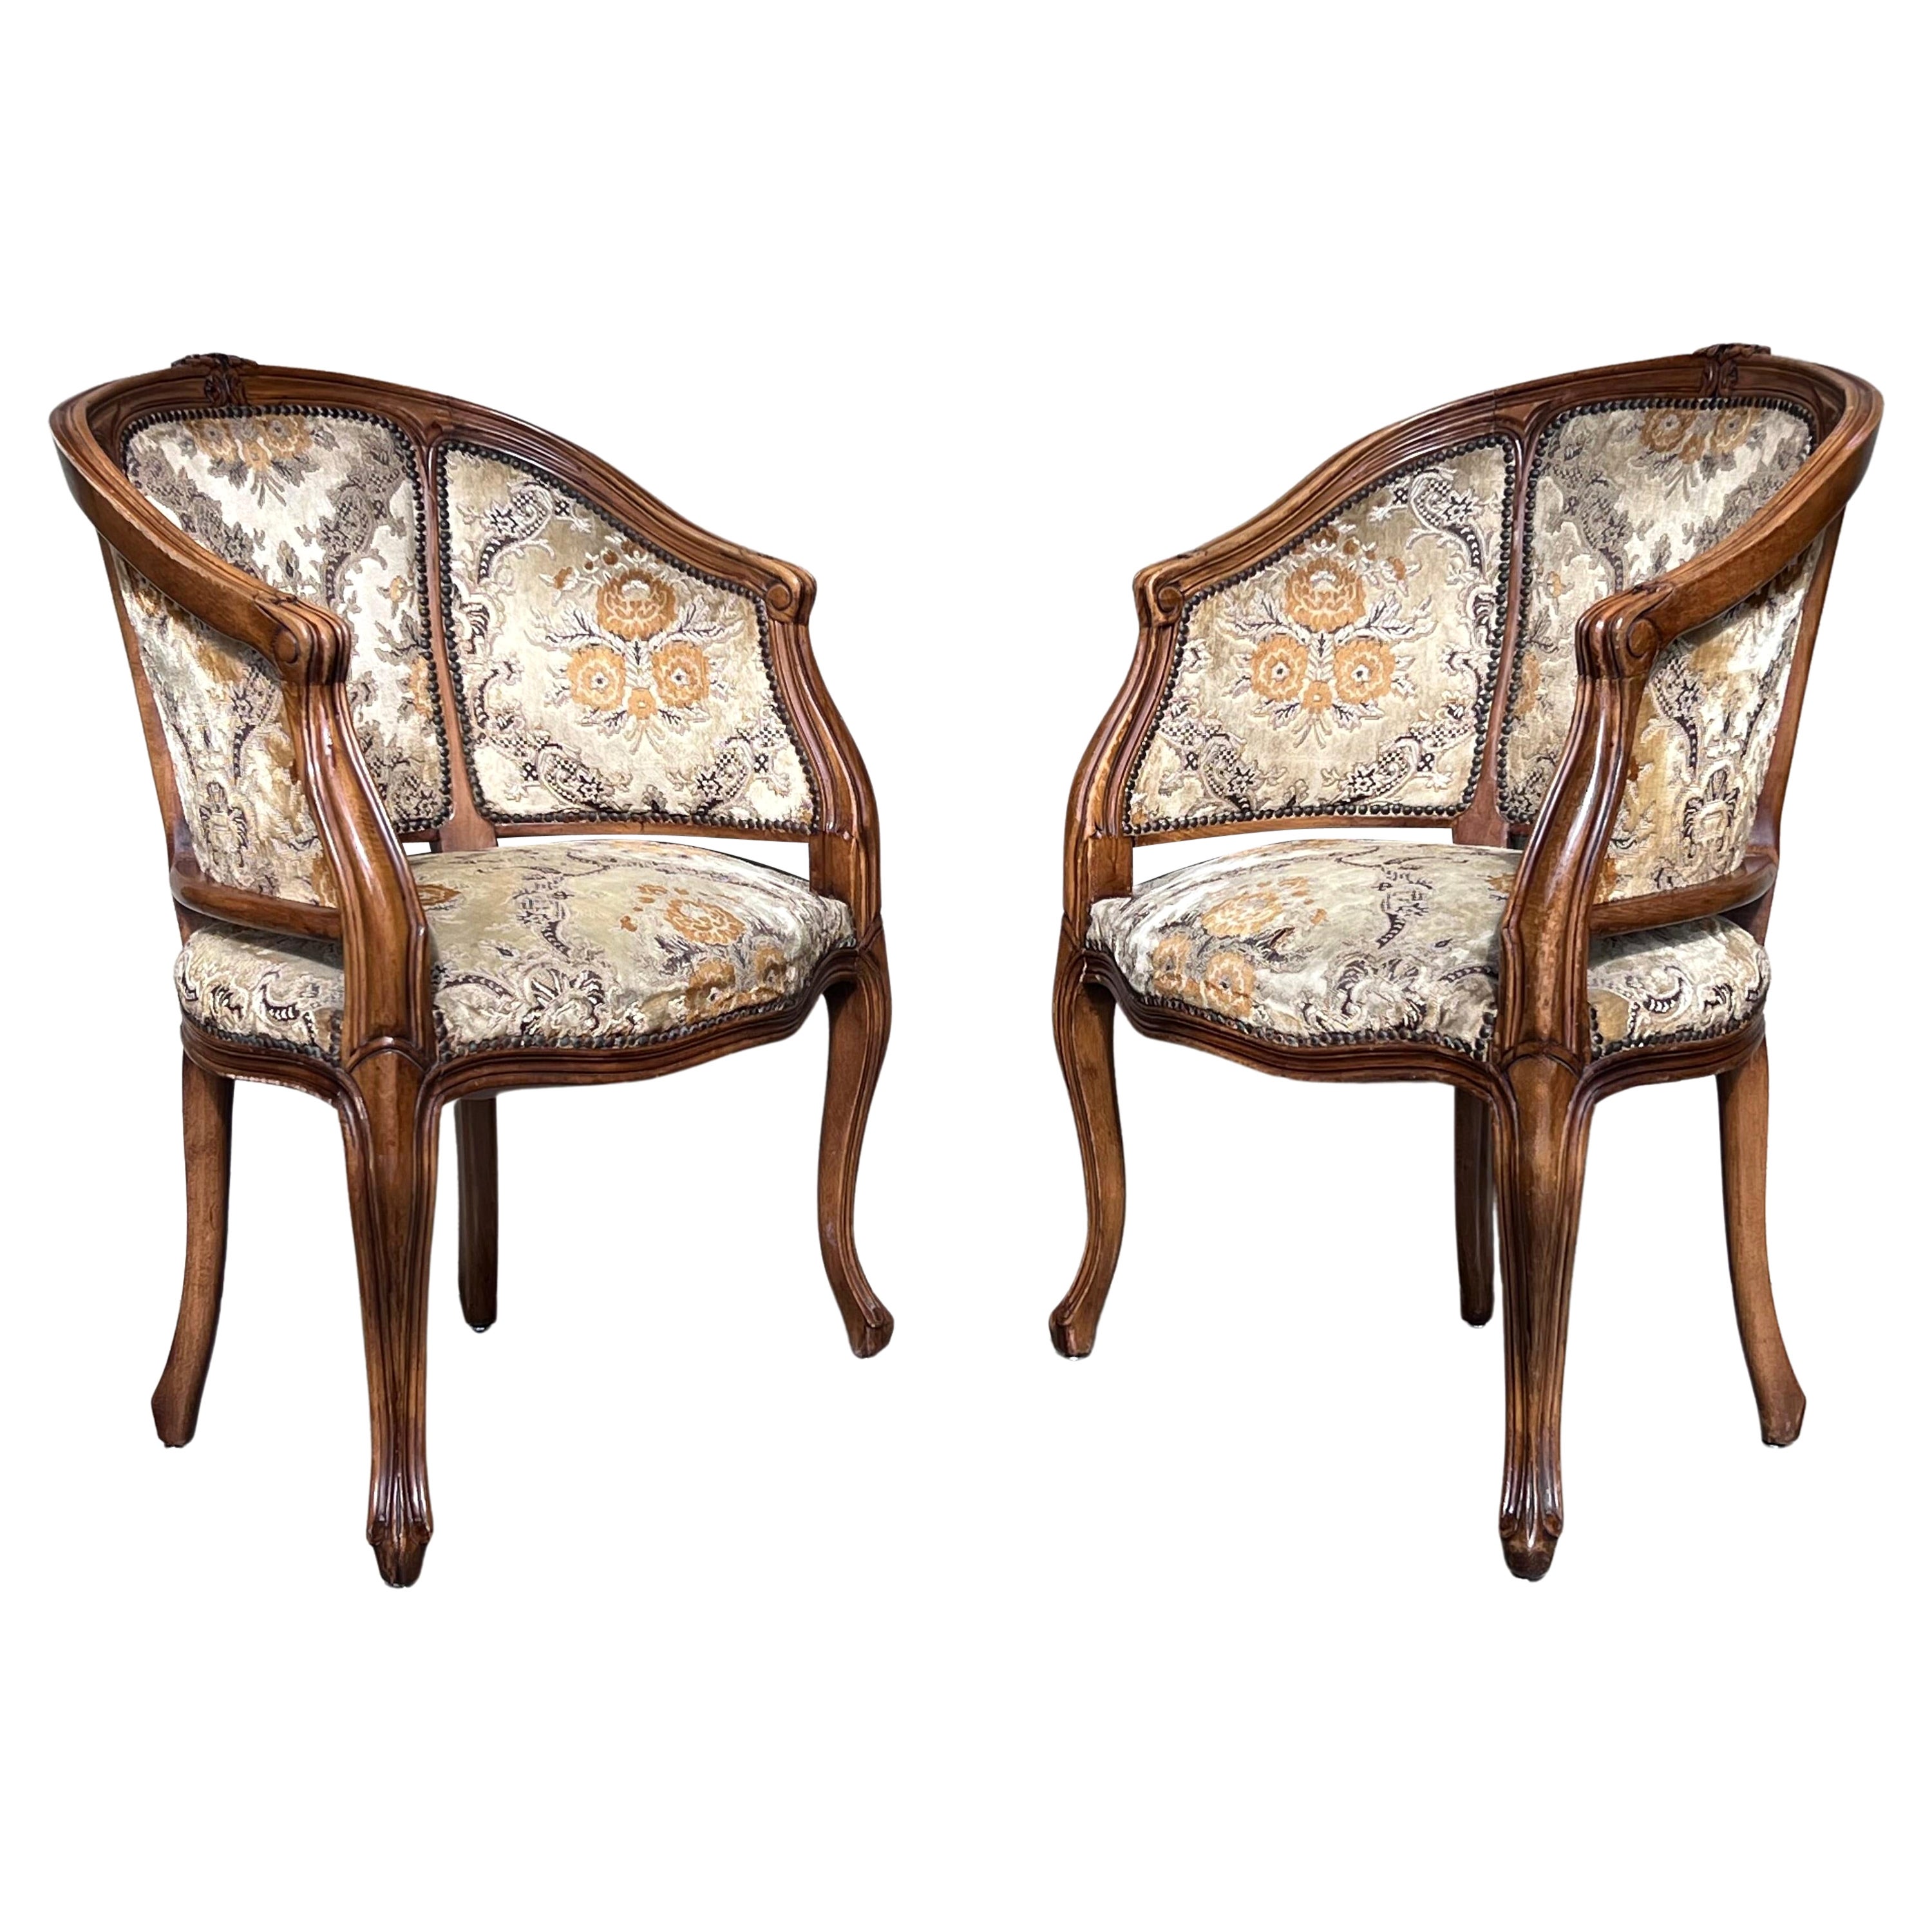 Pair of French Louis XVI Style Carved Walnut Round Bergere Armchairs